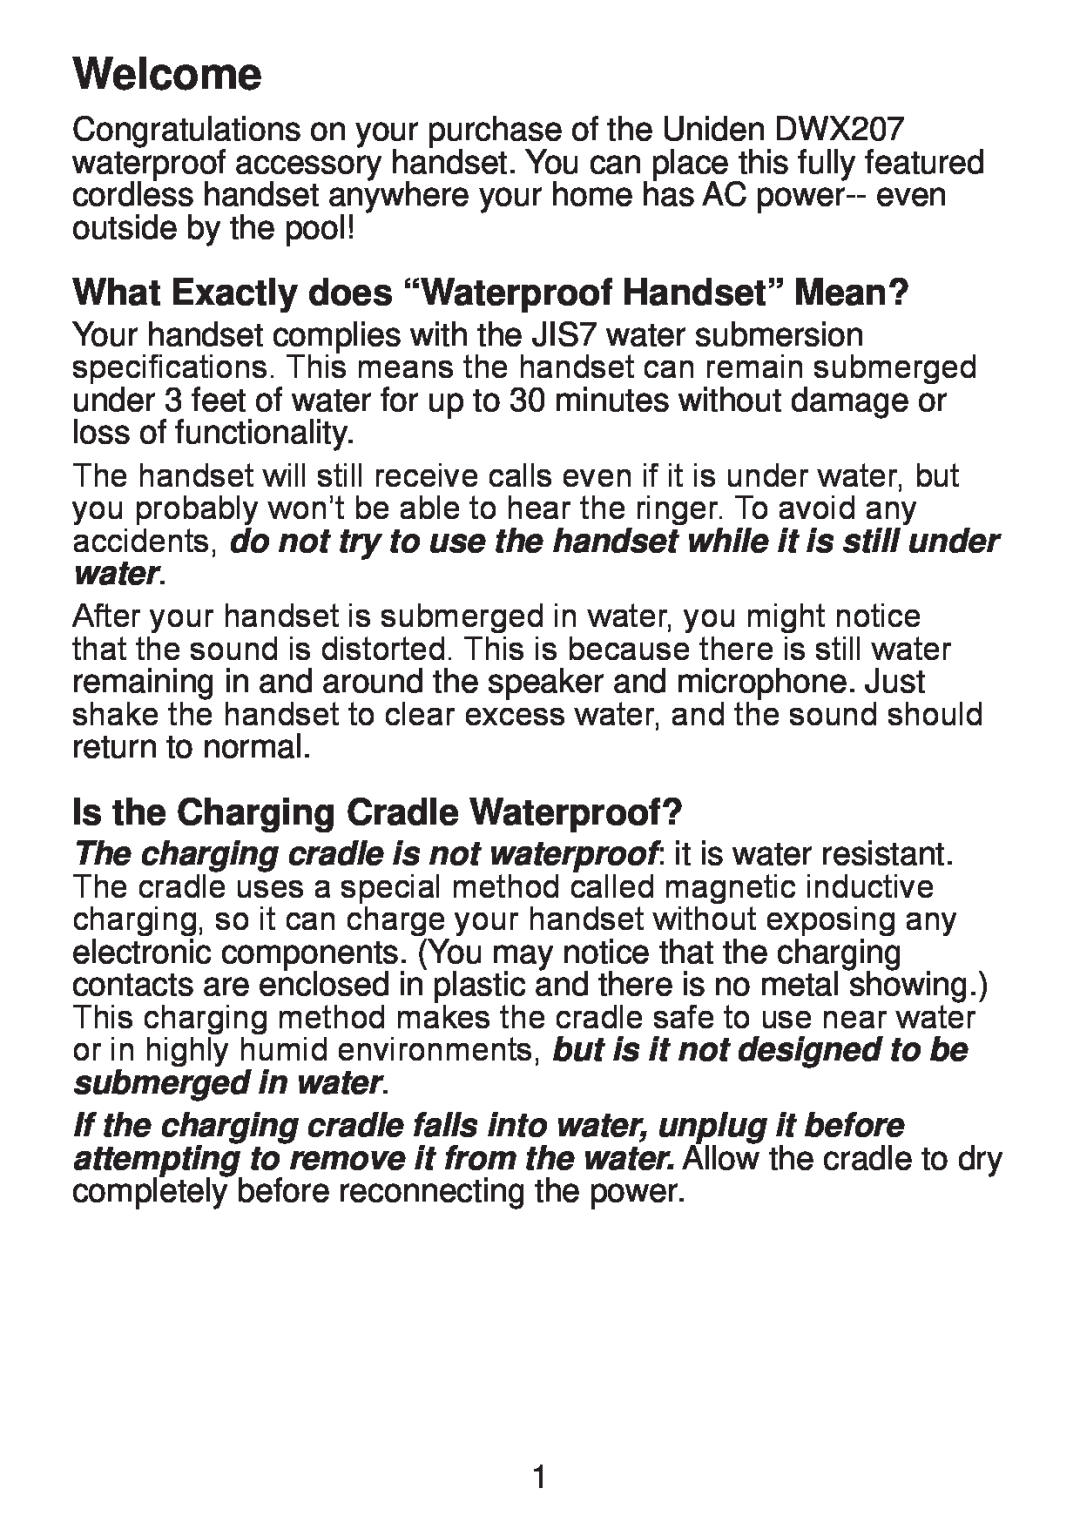 Uniden DWX207 manual Welcome, What Exactly does “Waterproof Handset” Mean?, Is the Charging Cradle Waterproof? 